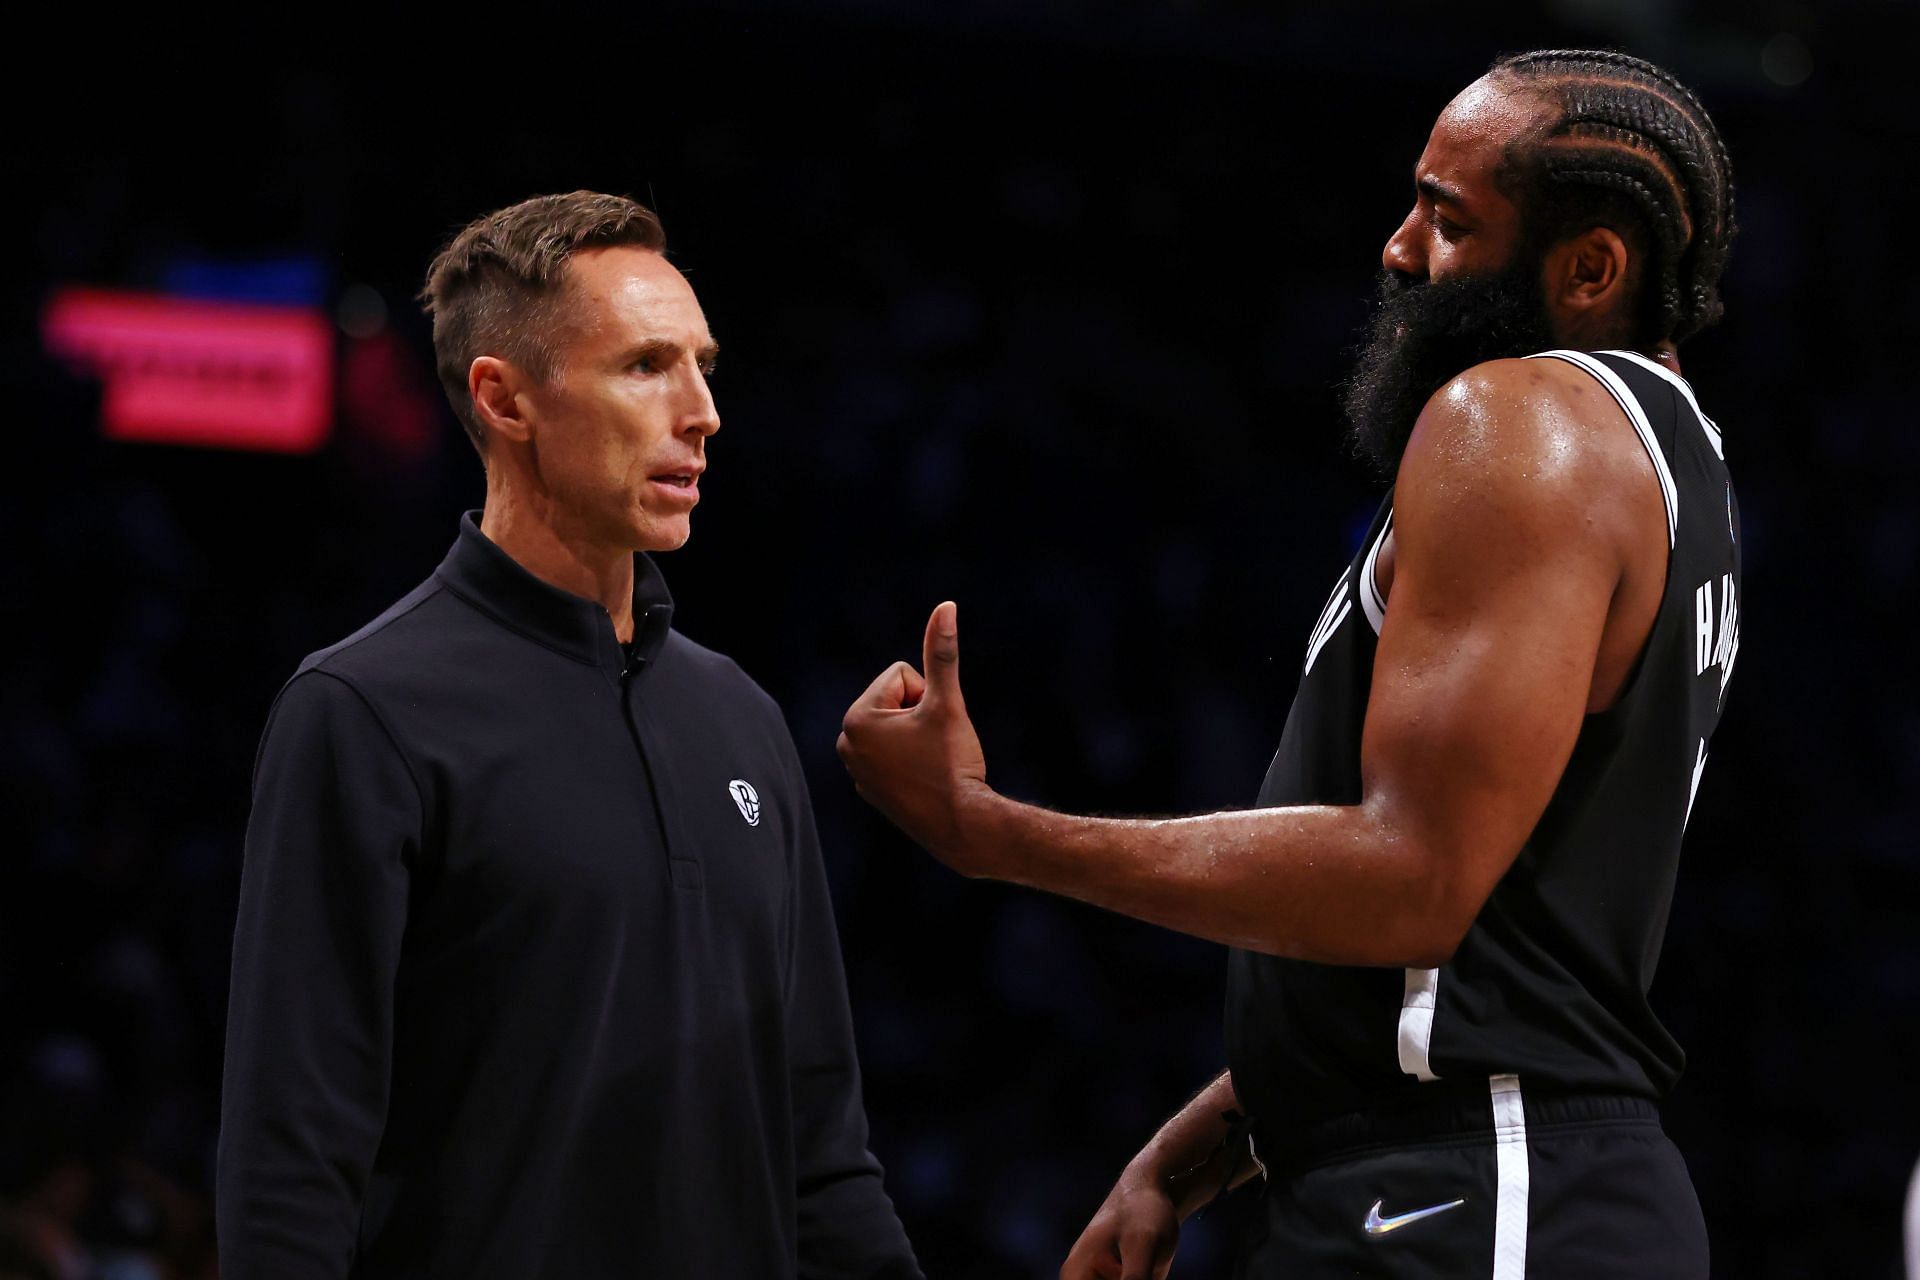 Steve Nash is tryng to lead the Brooklyn Nets out of an early funk.